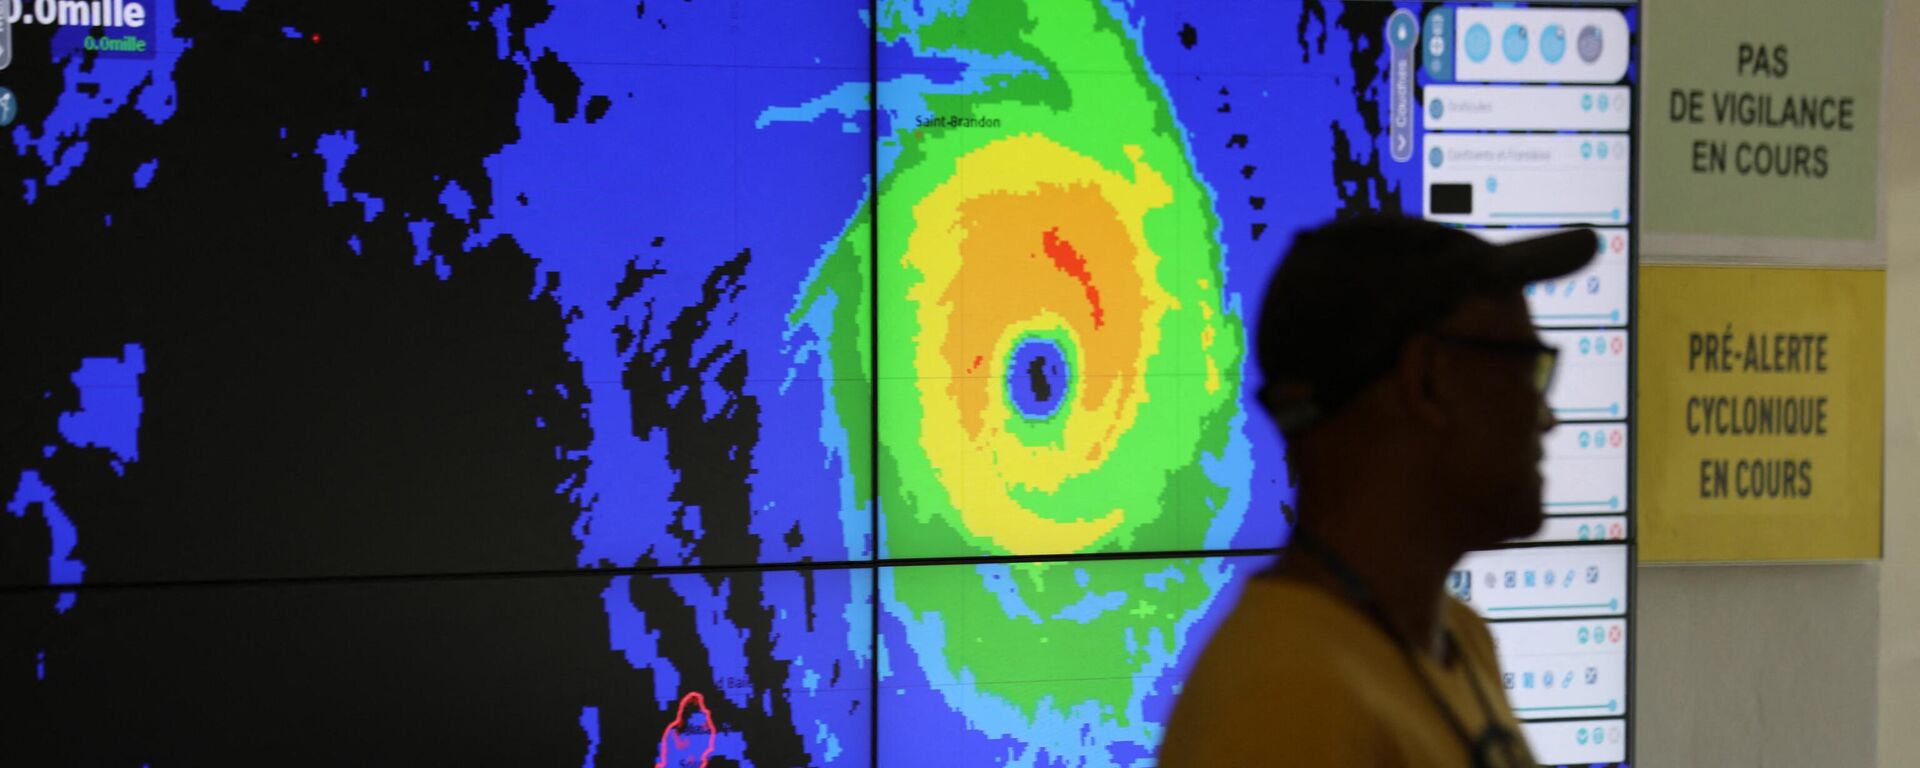 Forecasters monitor Cyclone Freddy at the France weather station, Meteo France, in Saint Denis de la Reunion, on the French overseas island of La Reunion on February 20, 2023 - Sputnik International, 1920, 22.02.2023